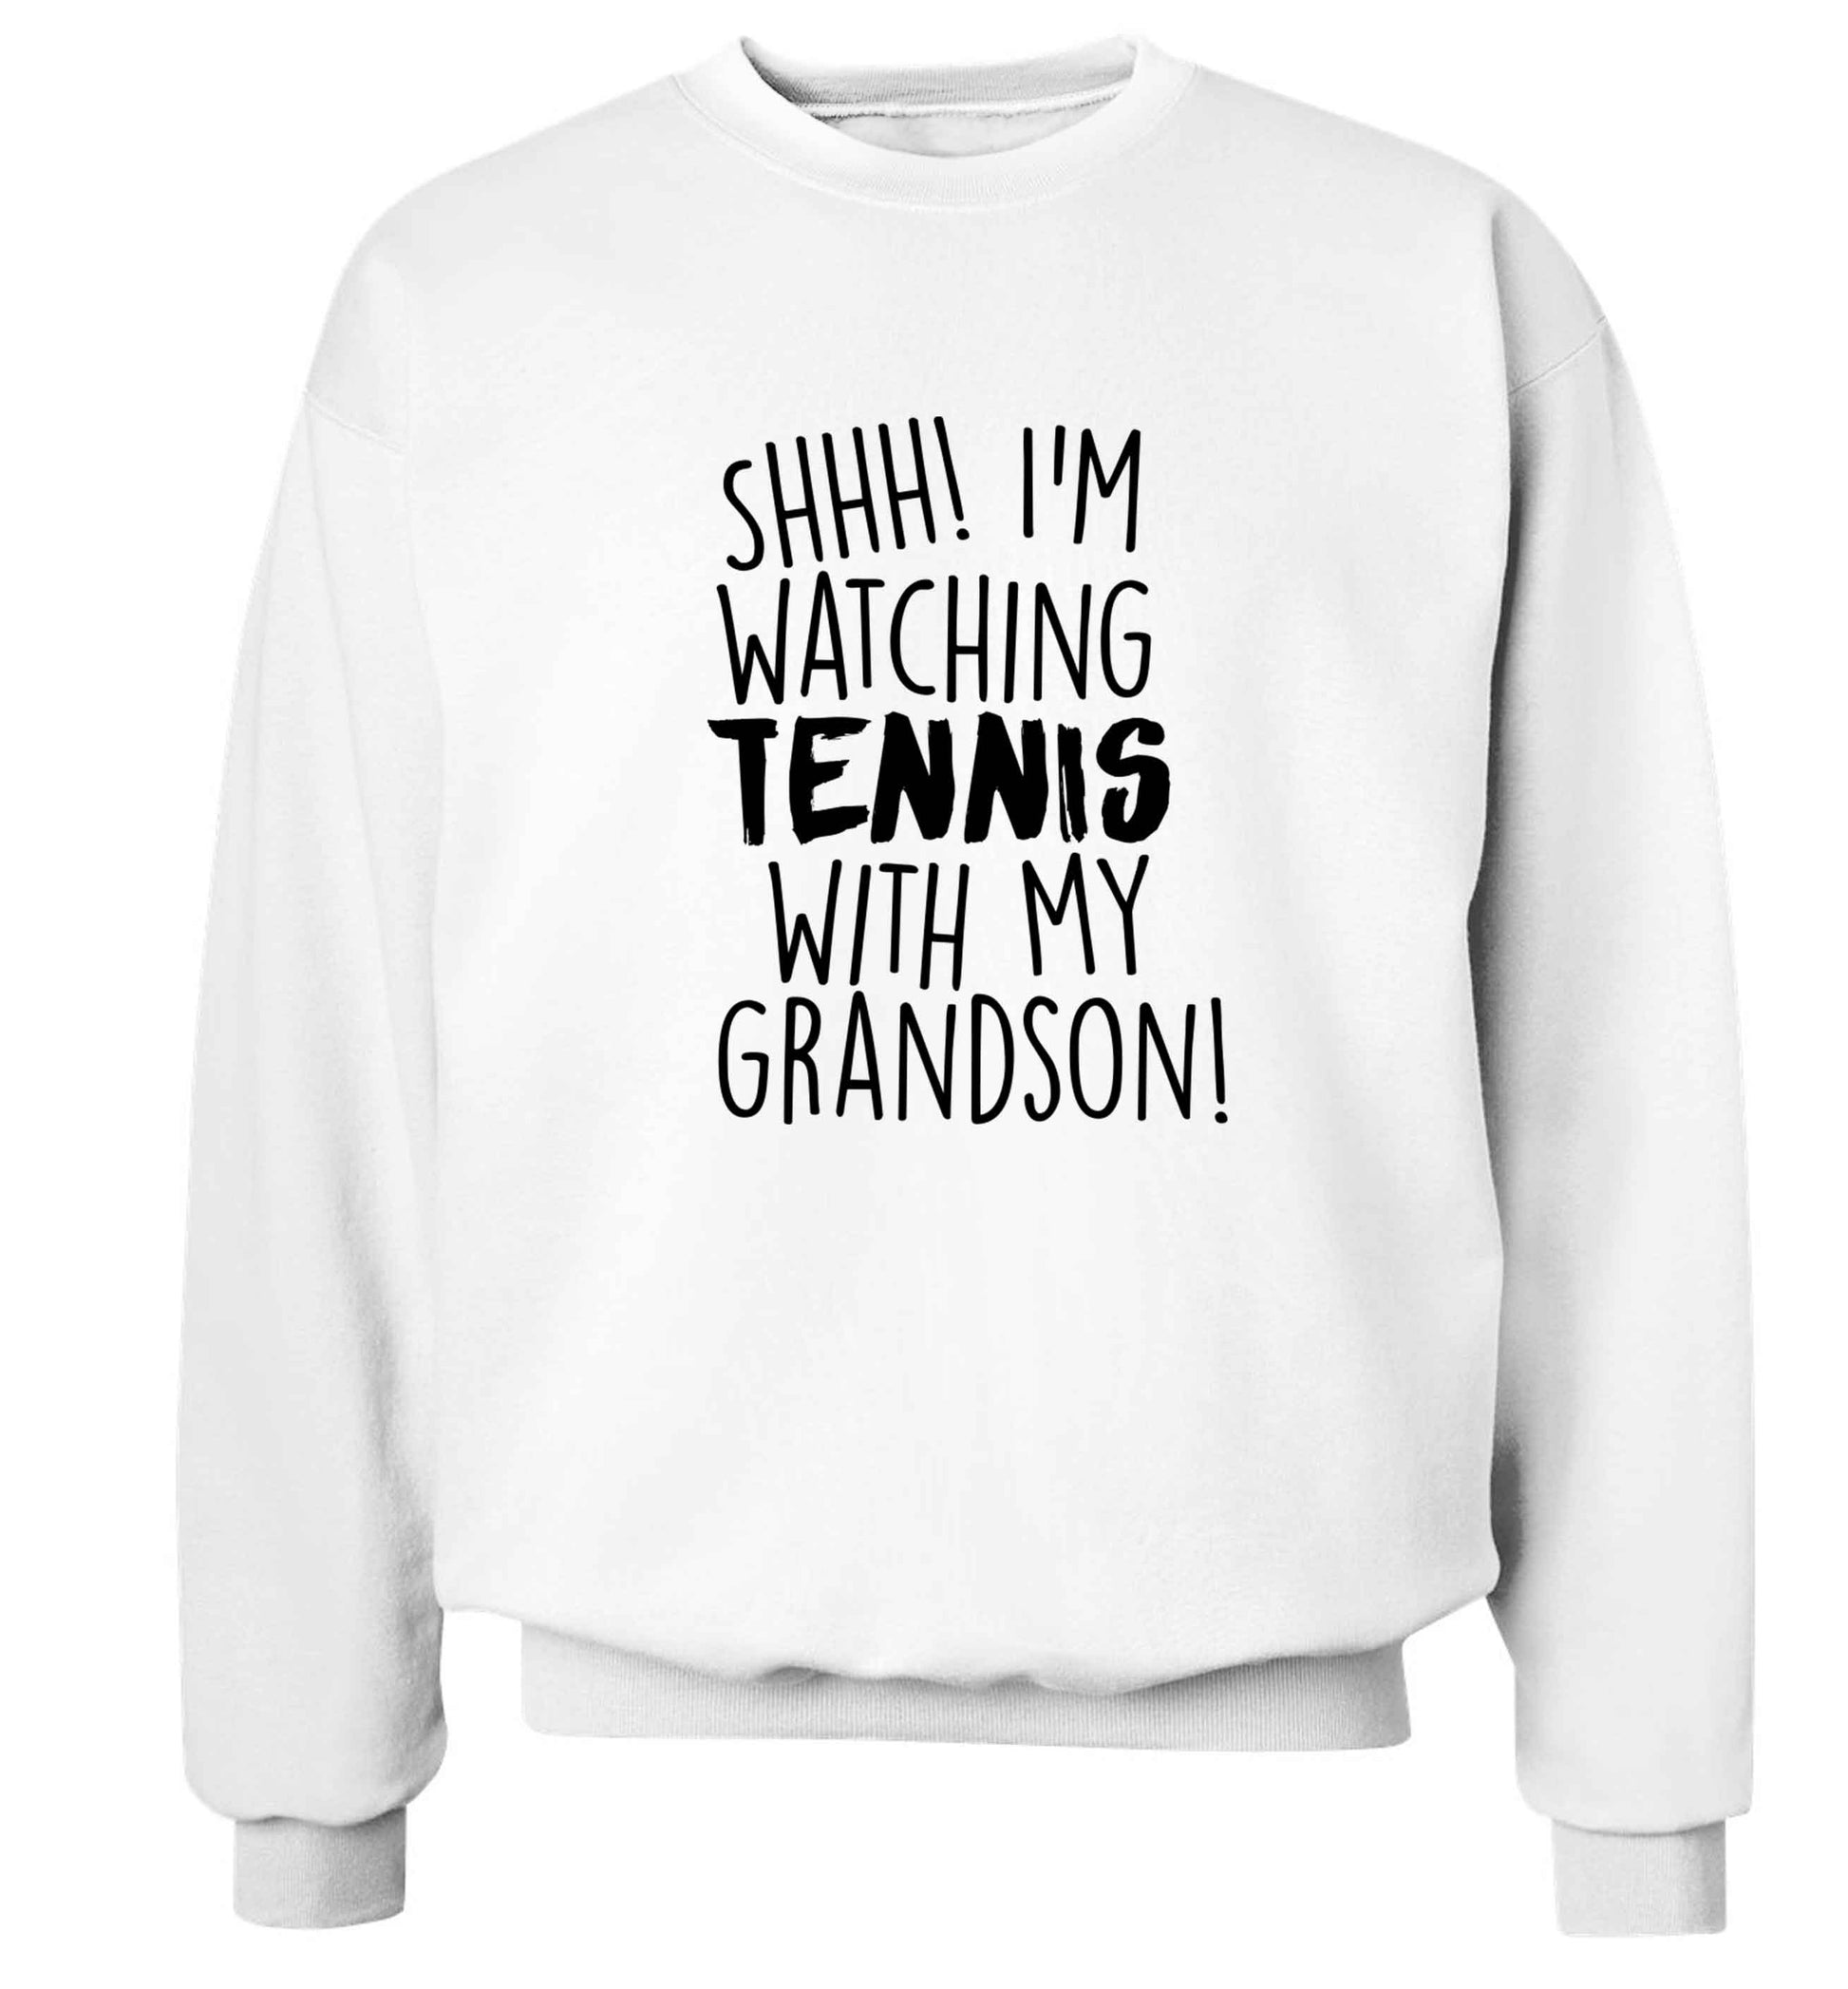 Shh! I'm watching tennis with my grandson! Adult's unisex white Sweater 2XL